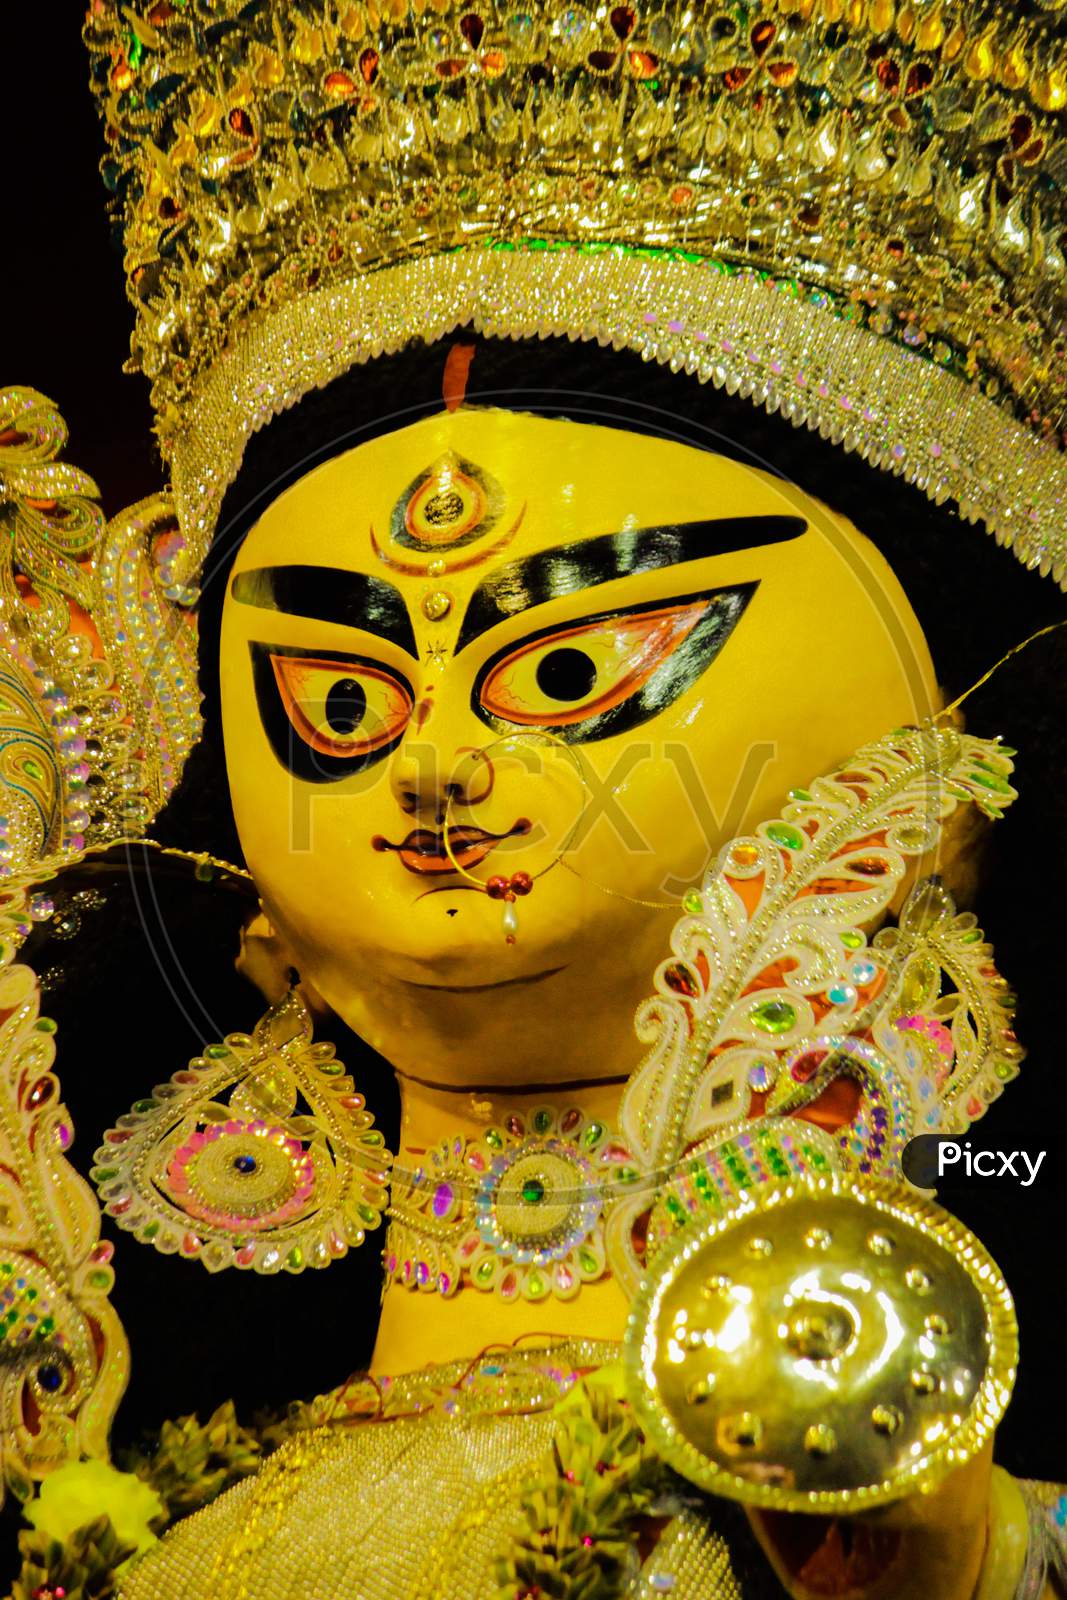 Durga Ma With Open Eyes In A Traditional Bengali Gesture